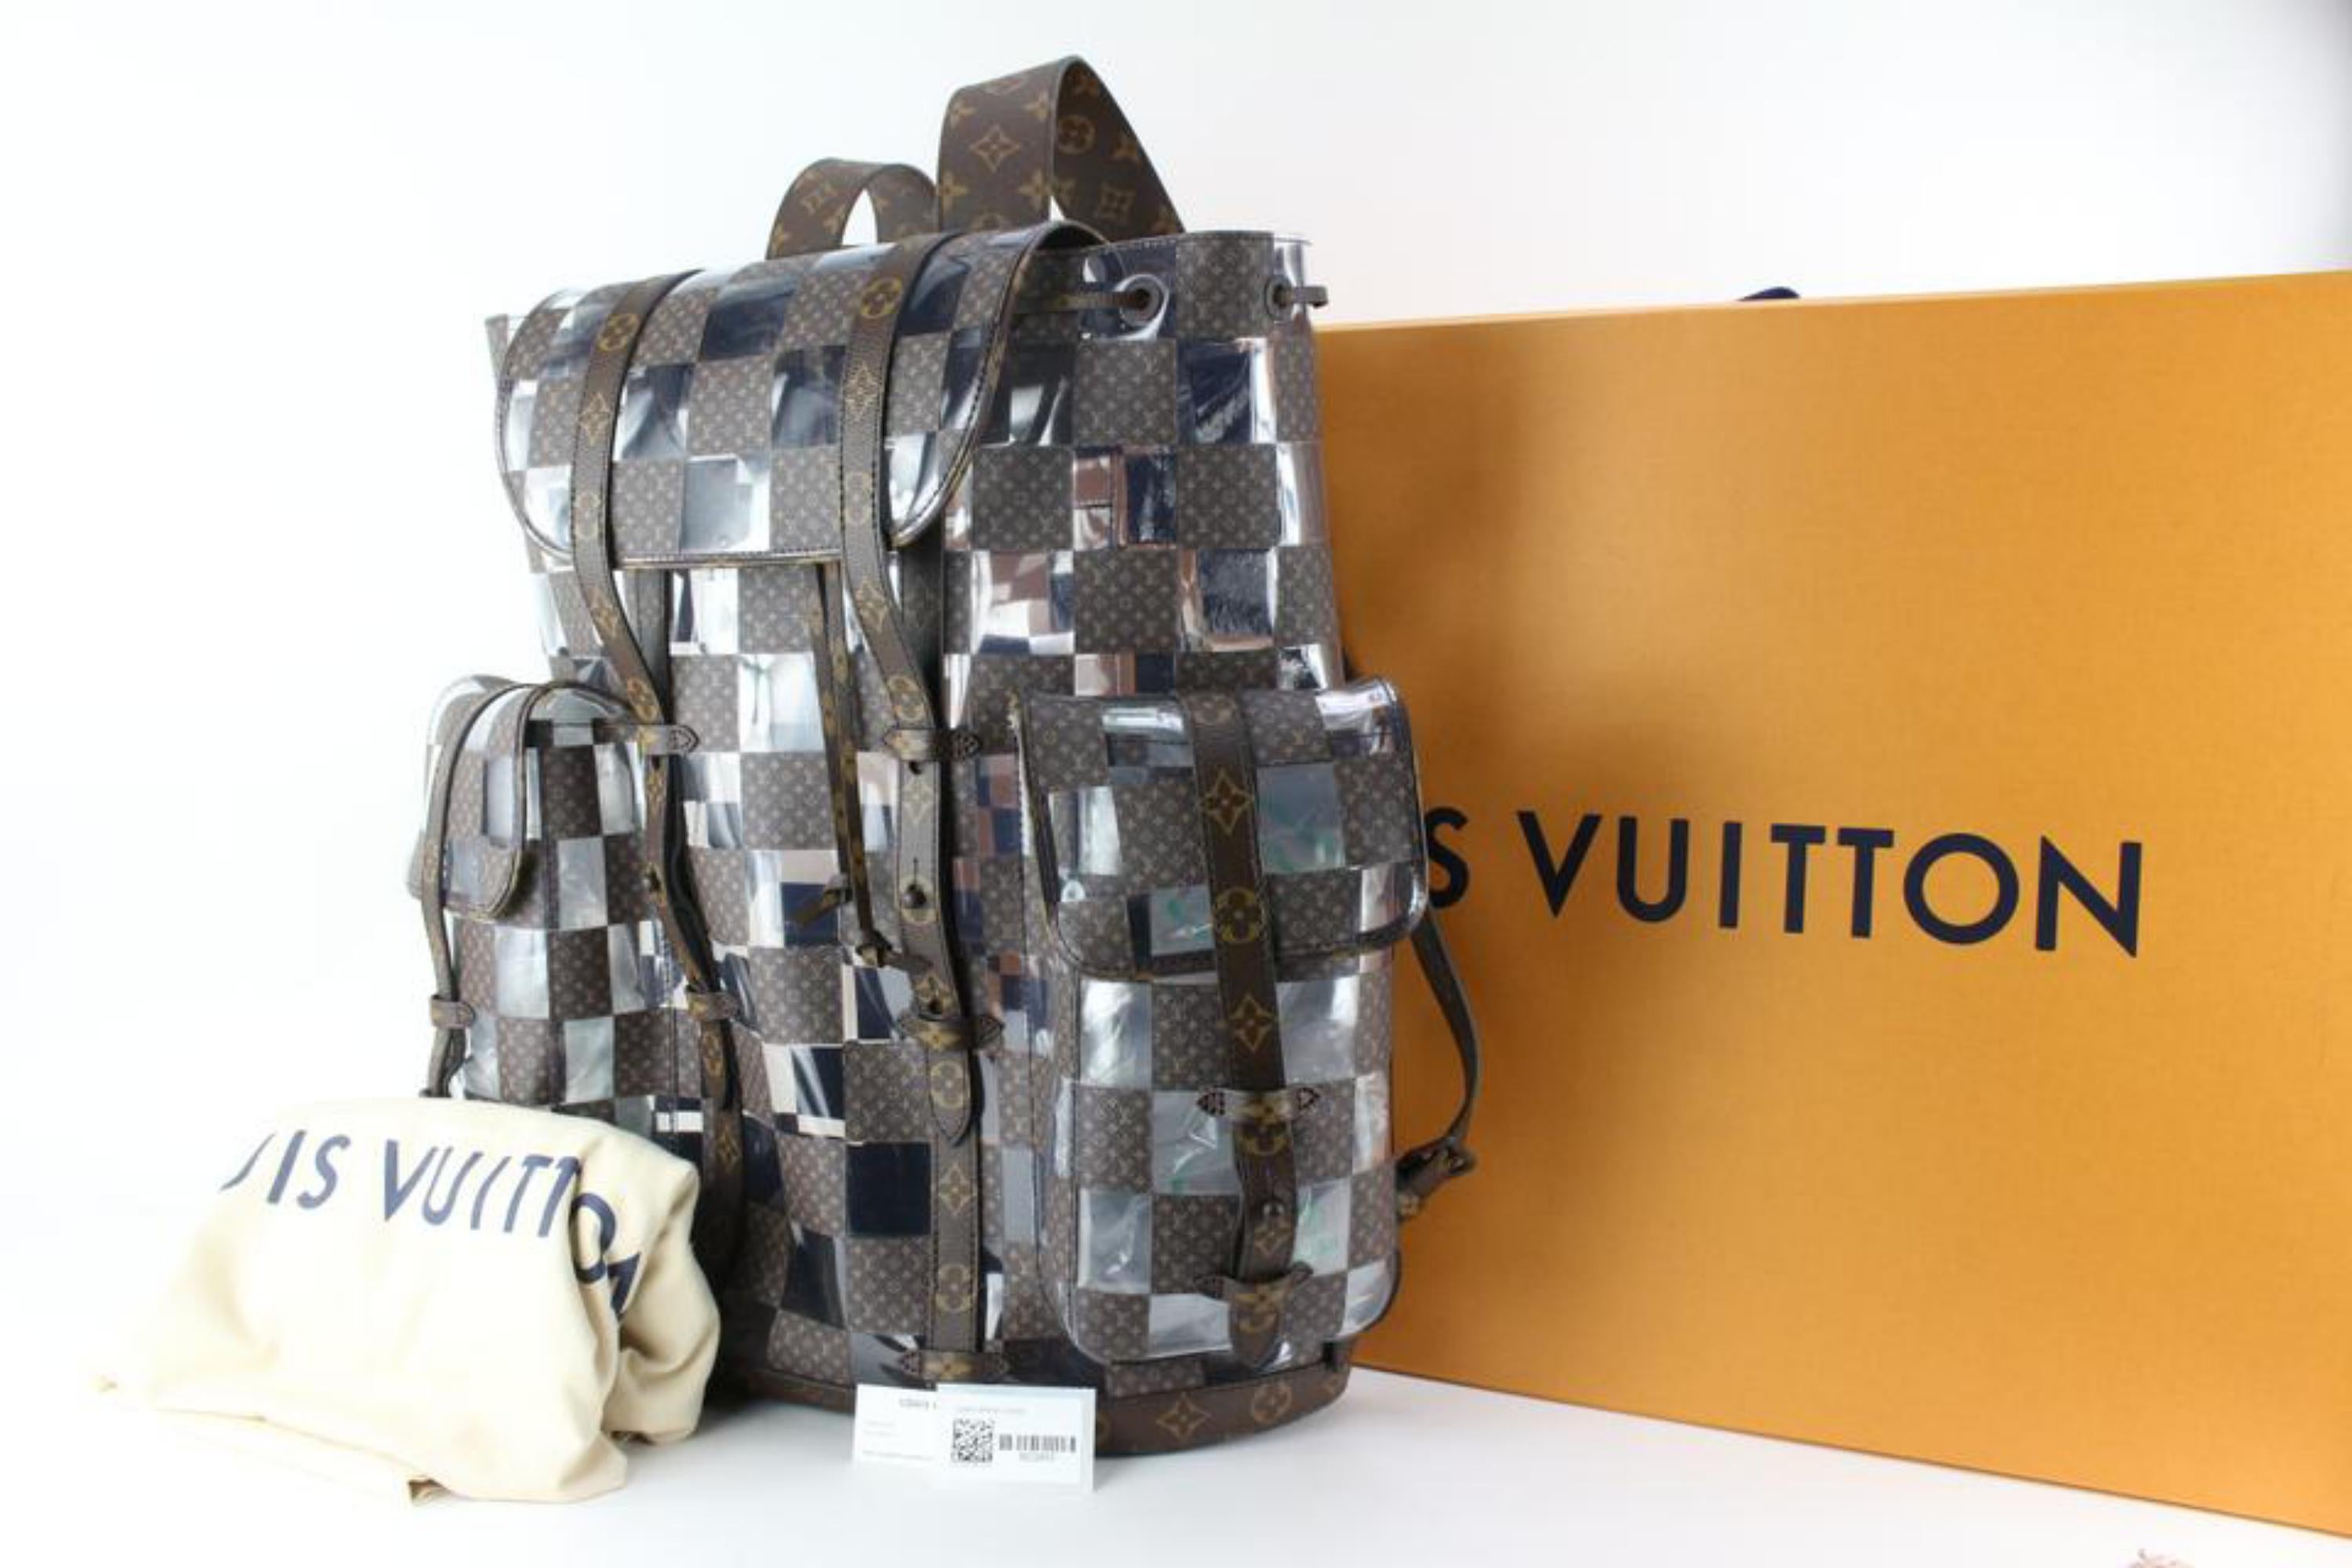 Louis Vuitton Christopher Backpack Monogram Brown in Coated Canvas